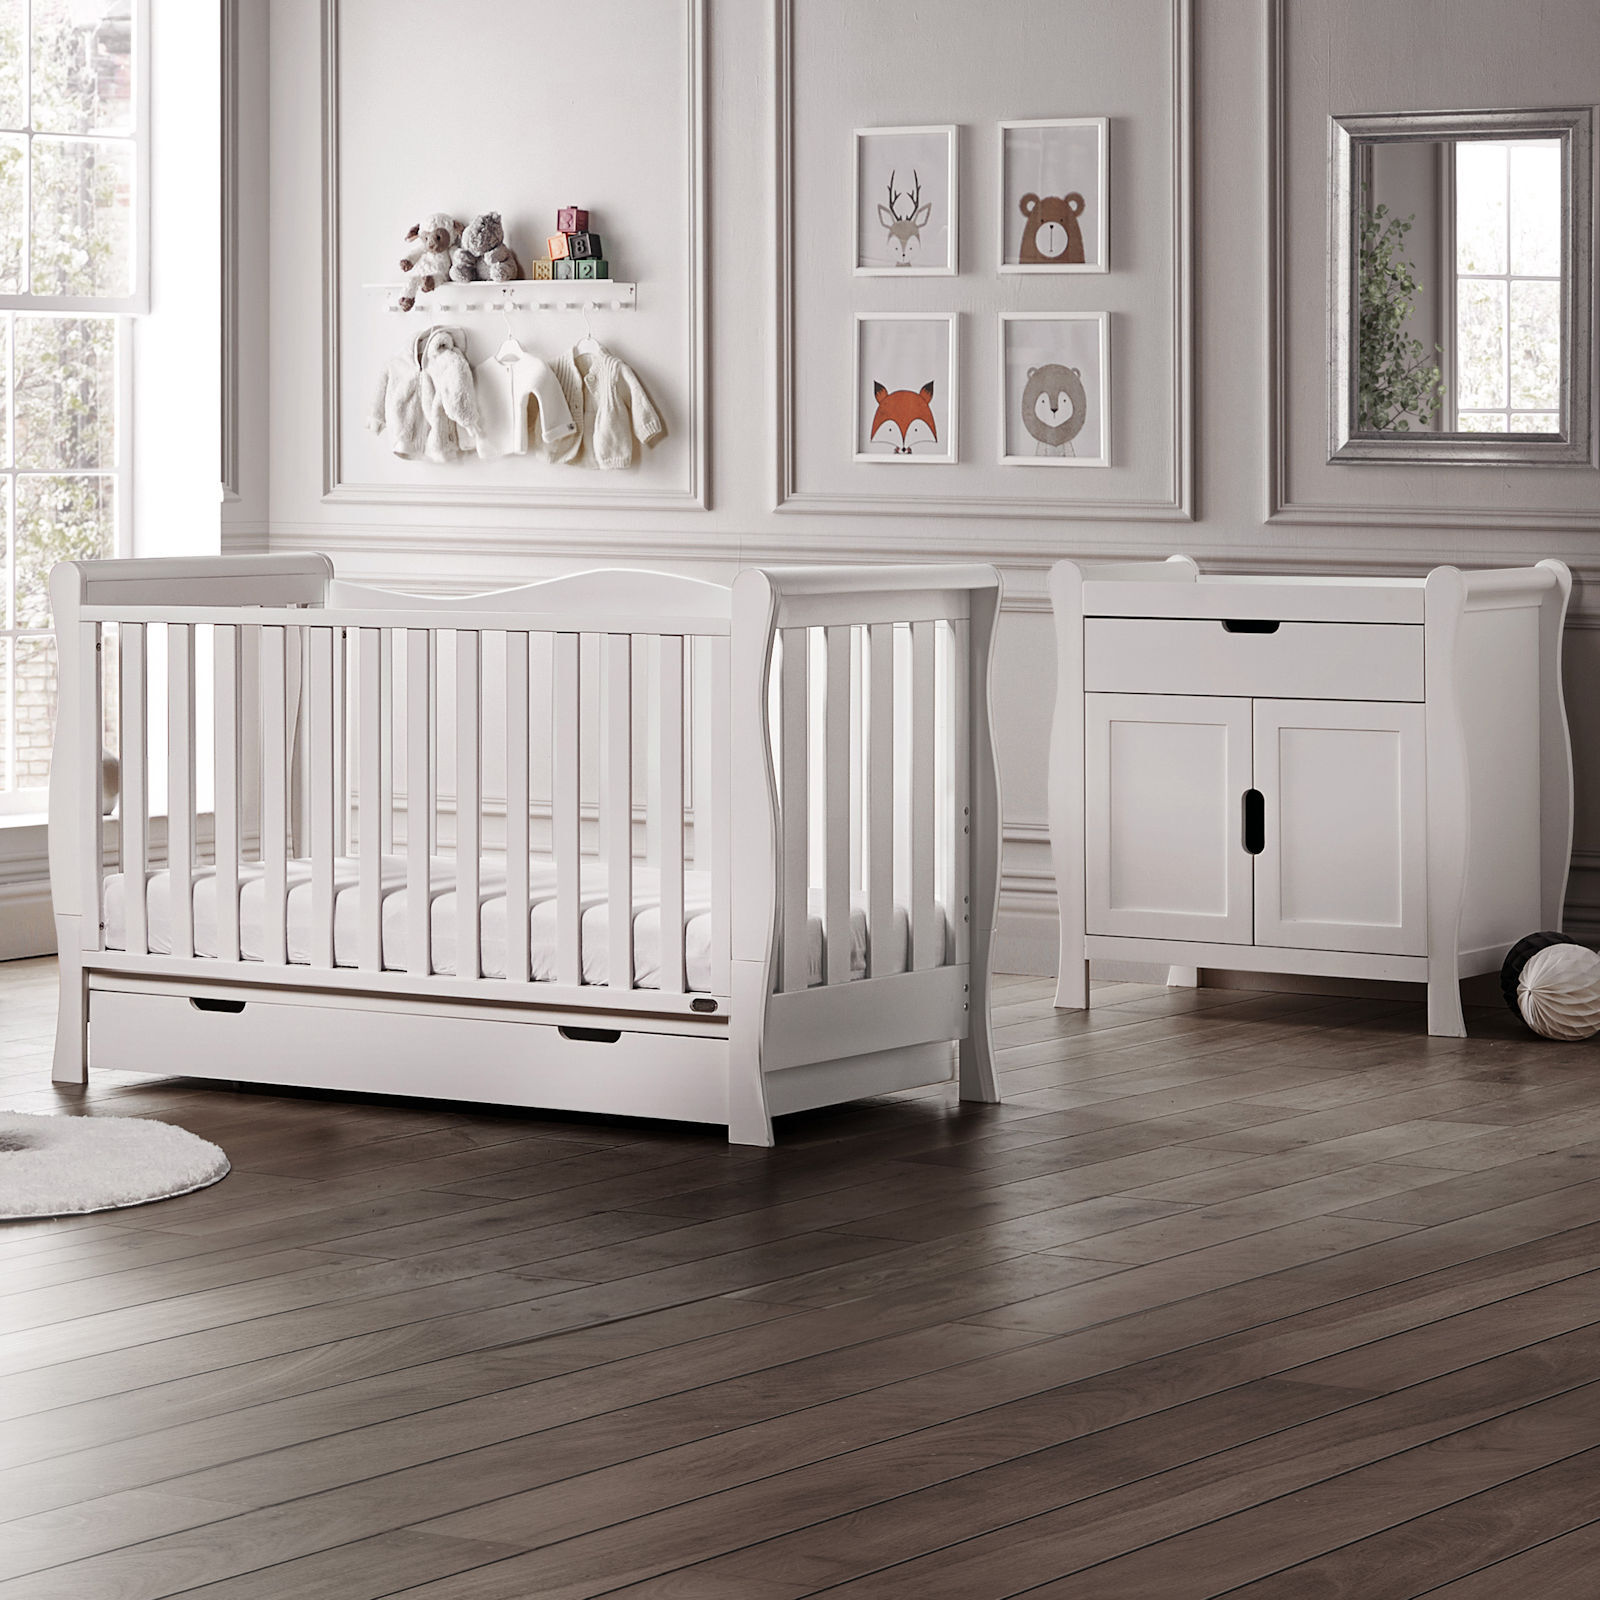 Puggle Prestbury Slatted Luxe Deluxe Sleigh 4pc Nursery Furniture Set with Drawer - White